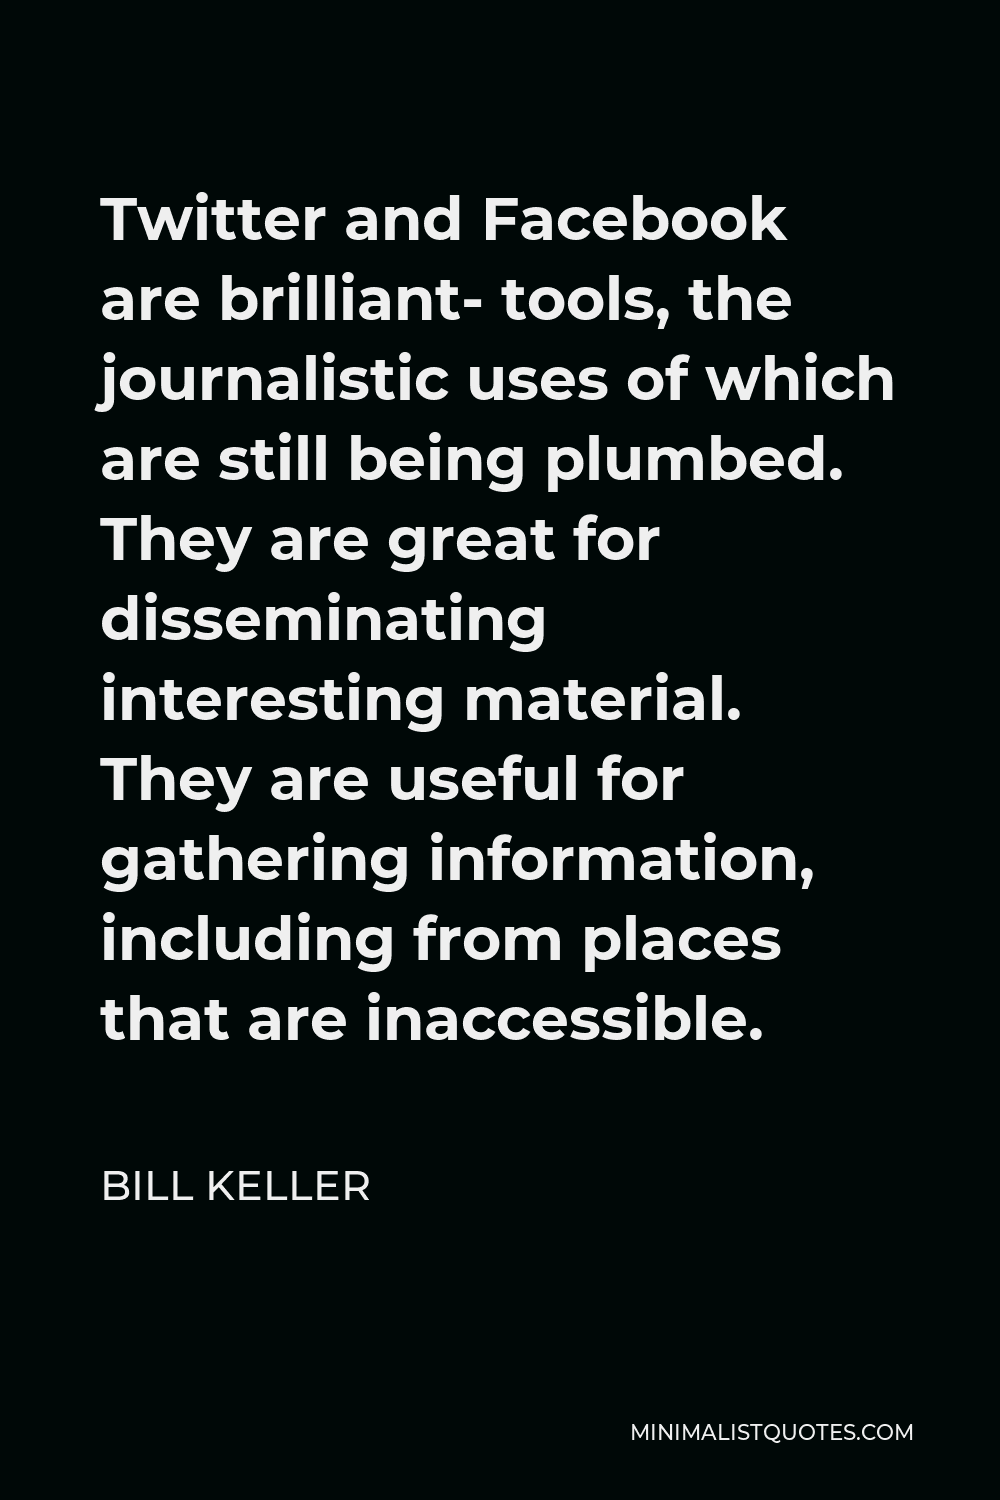 Bill Keller Quote - Twitter and Facebook are brilliant- tools, the journalistic uses of which are still being plumbed. They are great for disseminating interesting material. They are useful for gathering information, including from places that are inaccessible.